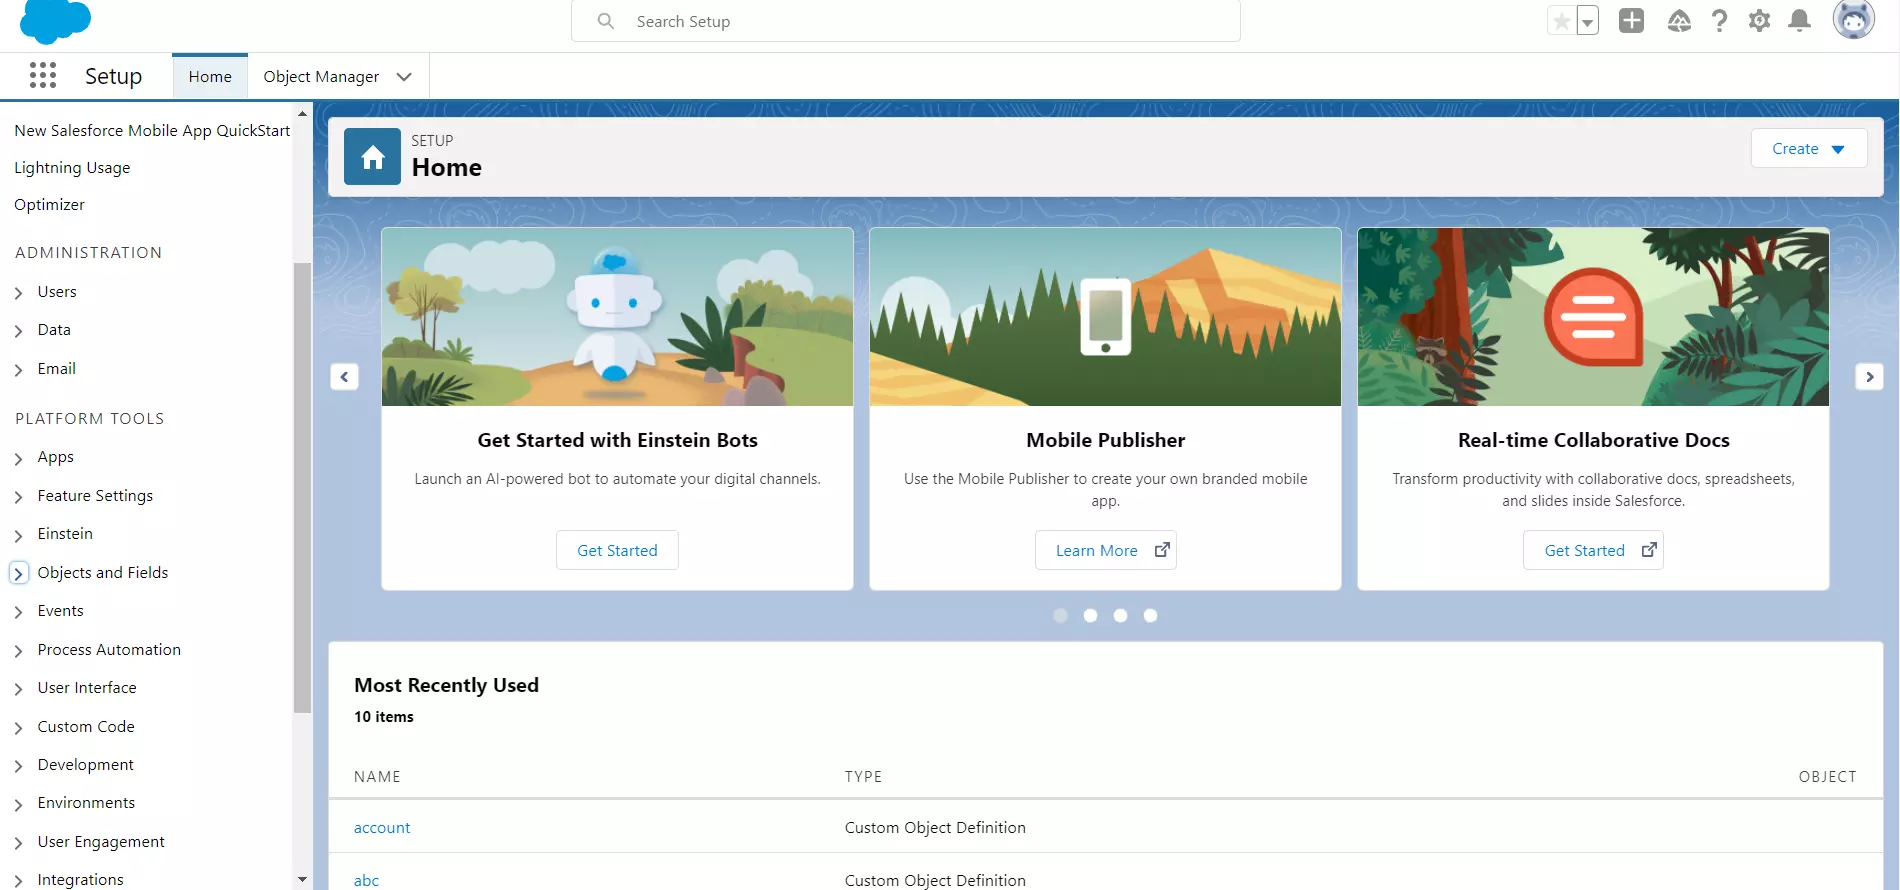 Configure Salesforce for Object sync - Home Screen